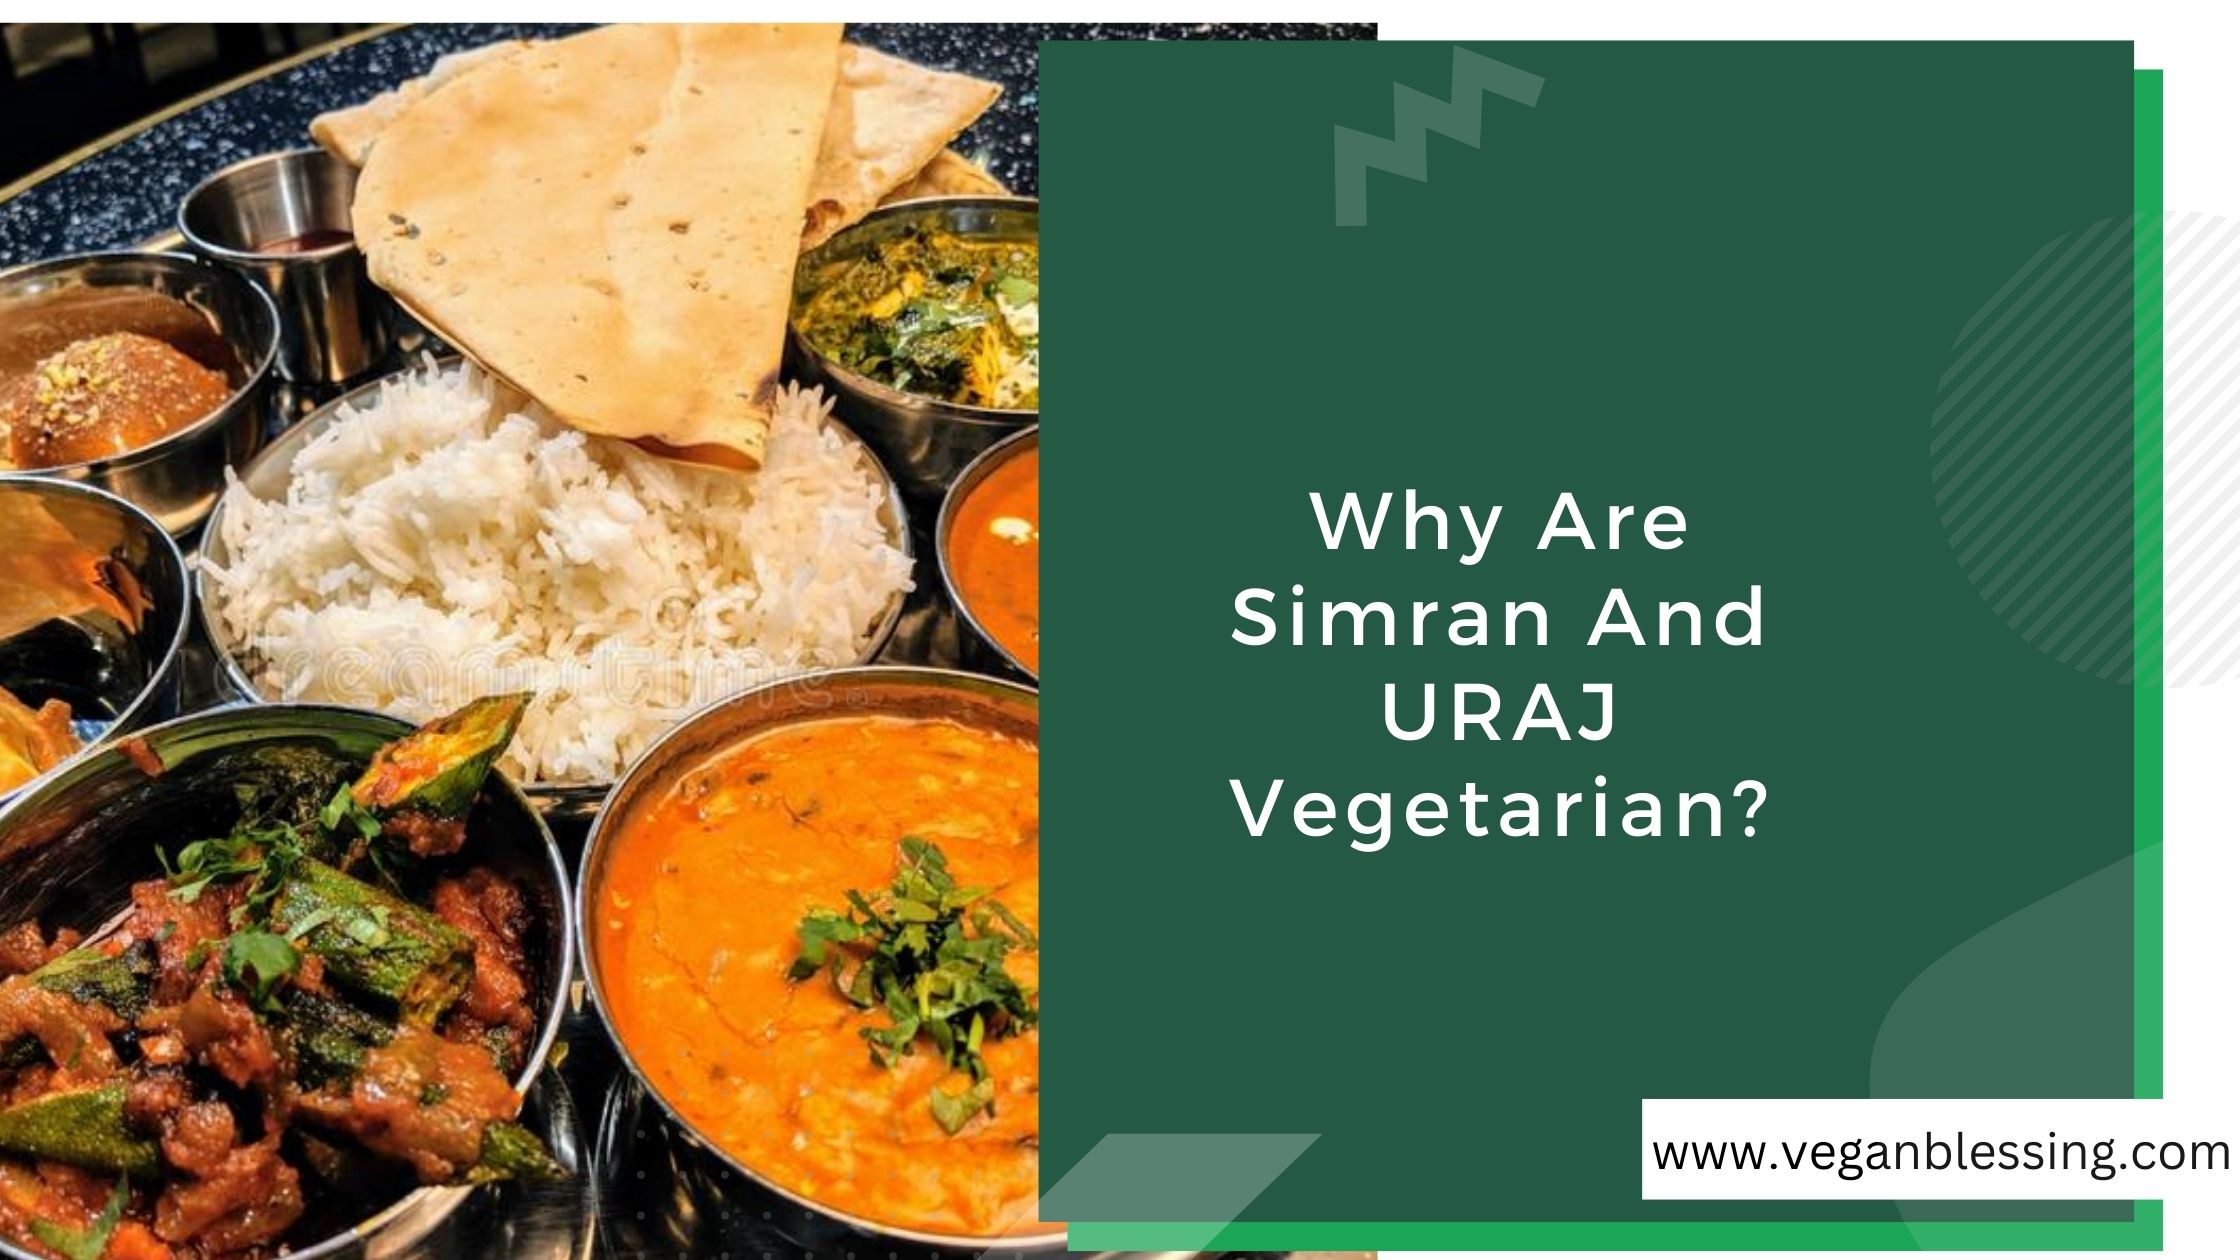 Why Are Simran And URAJ Vegetarian? Why Are Simran And URAJ Vegetarian